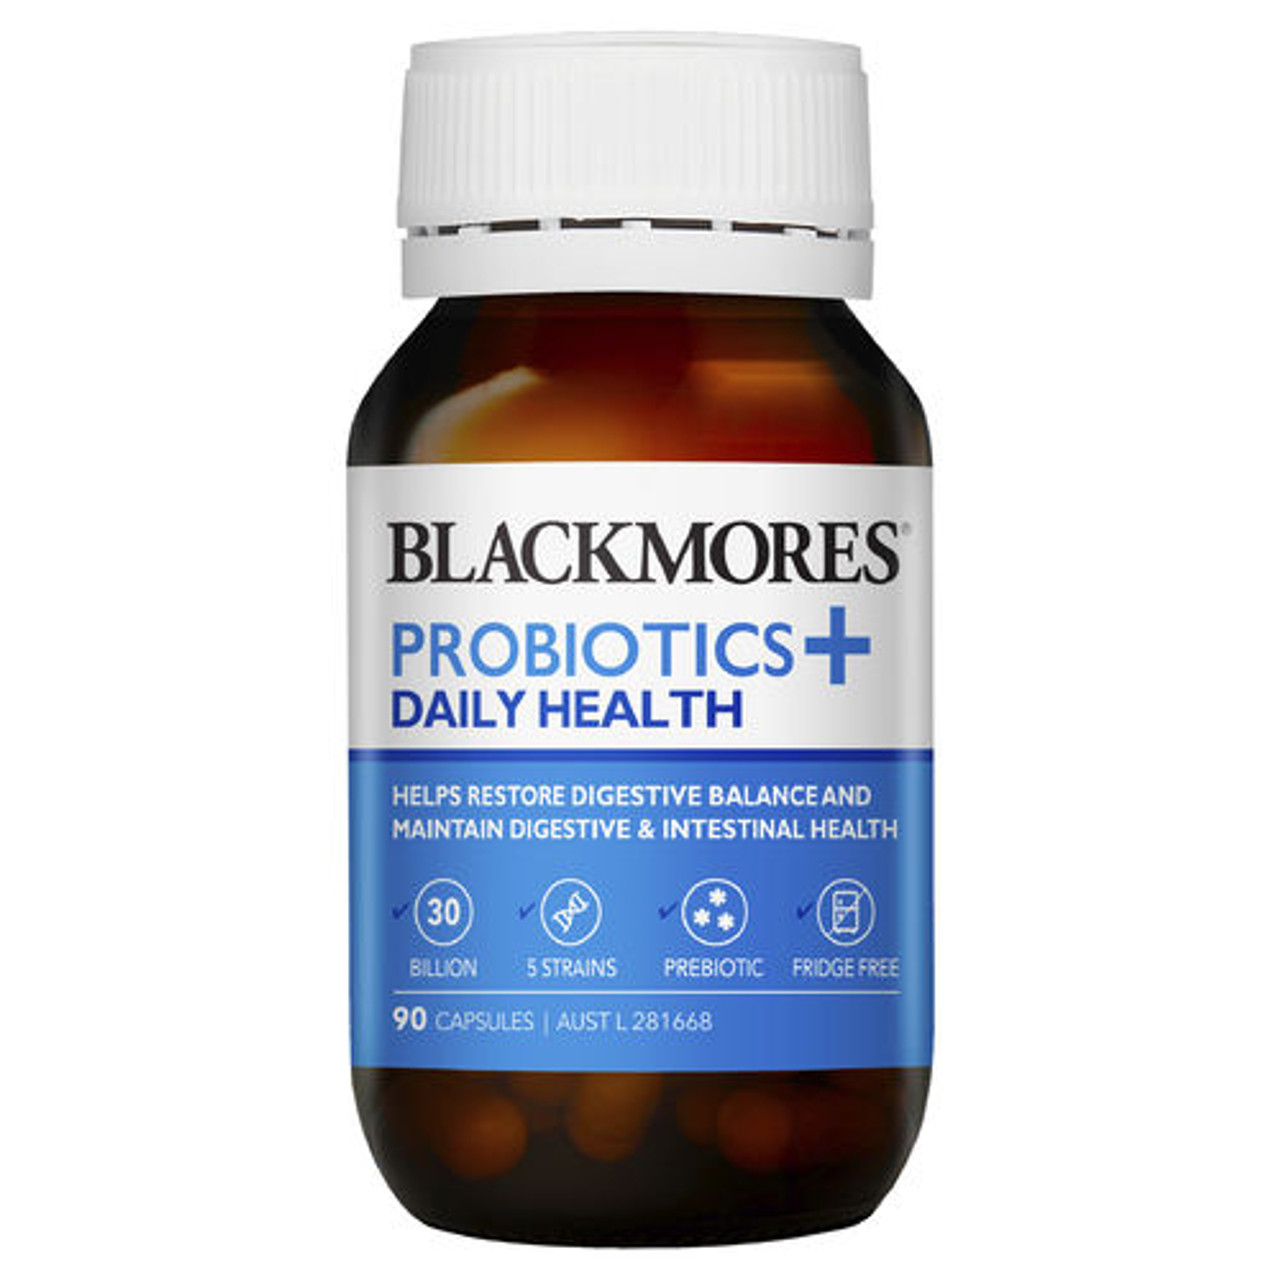 Пищевая добавка Blackmores + Daily Health, 90 капсул пищевая добавка blackmores omega mini double concentrate 200 капсул